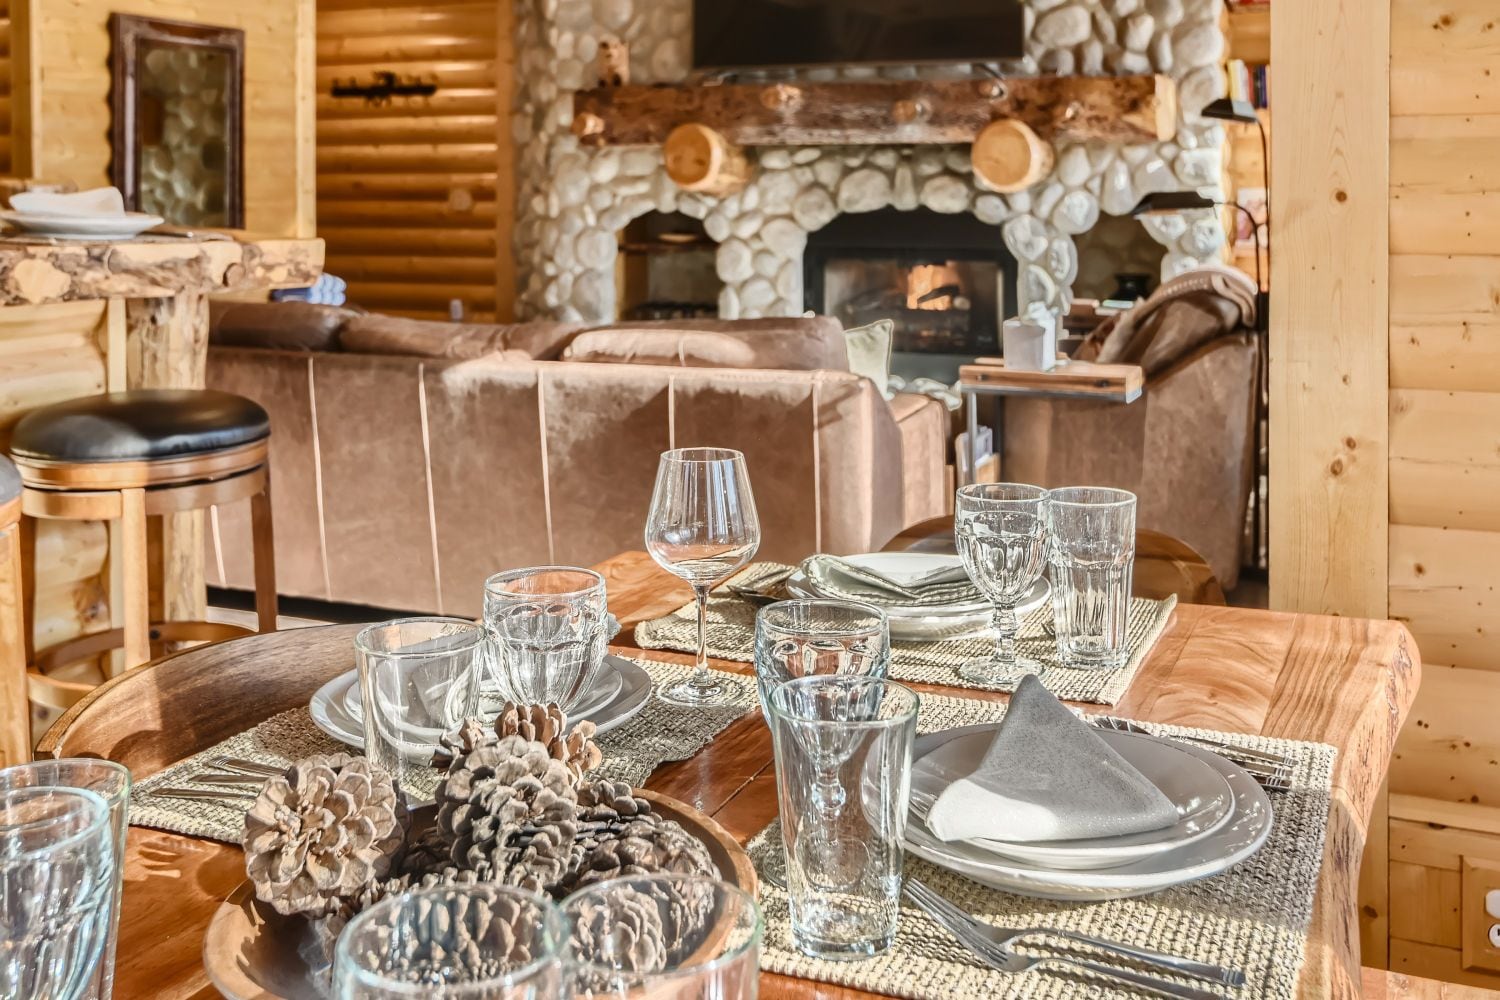 Enjoy a lovely apres ski meal with the family - 